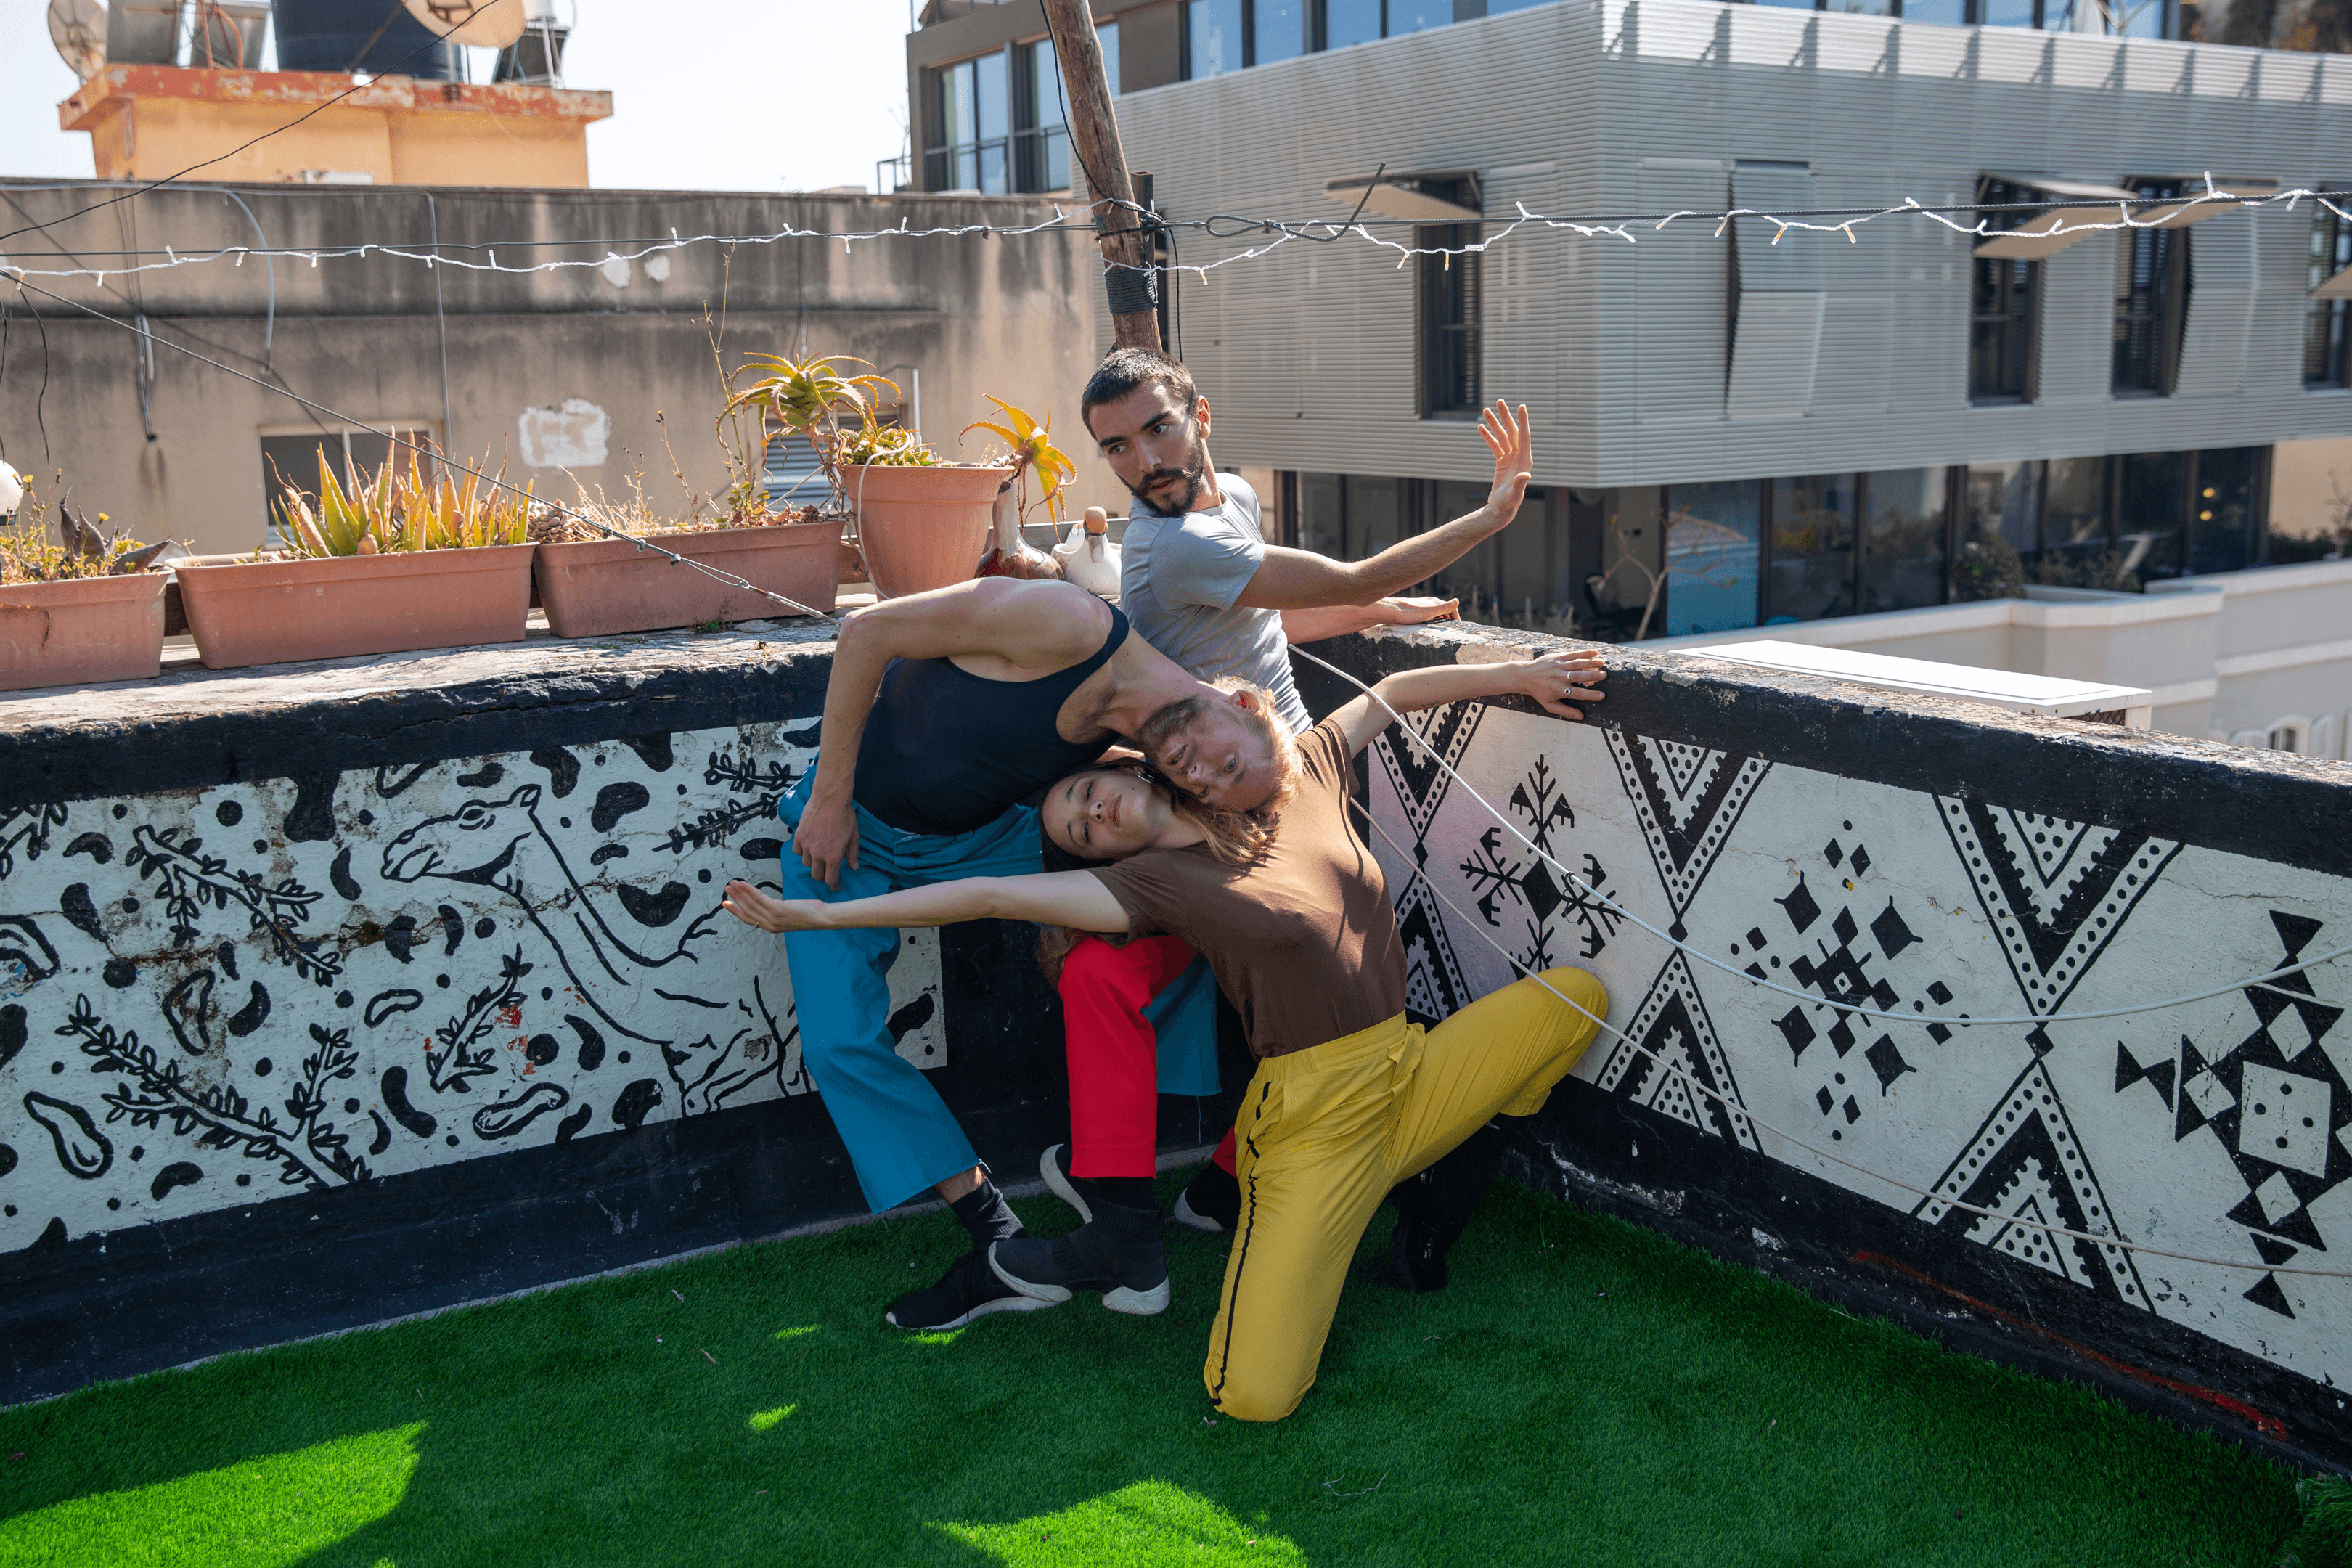 Dancers on Rooftops #112 - Billy, Gianni and Danai (Israel, 2022)